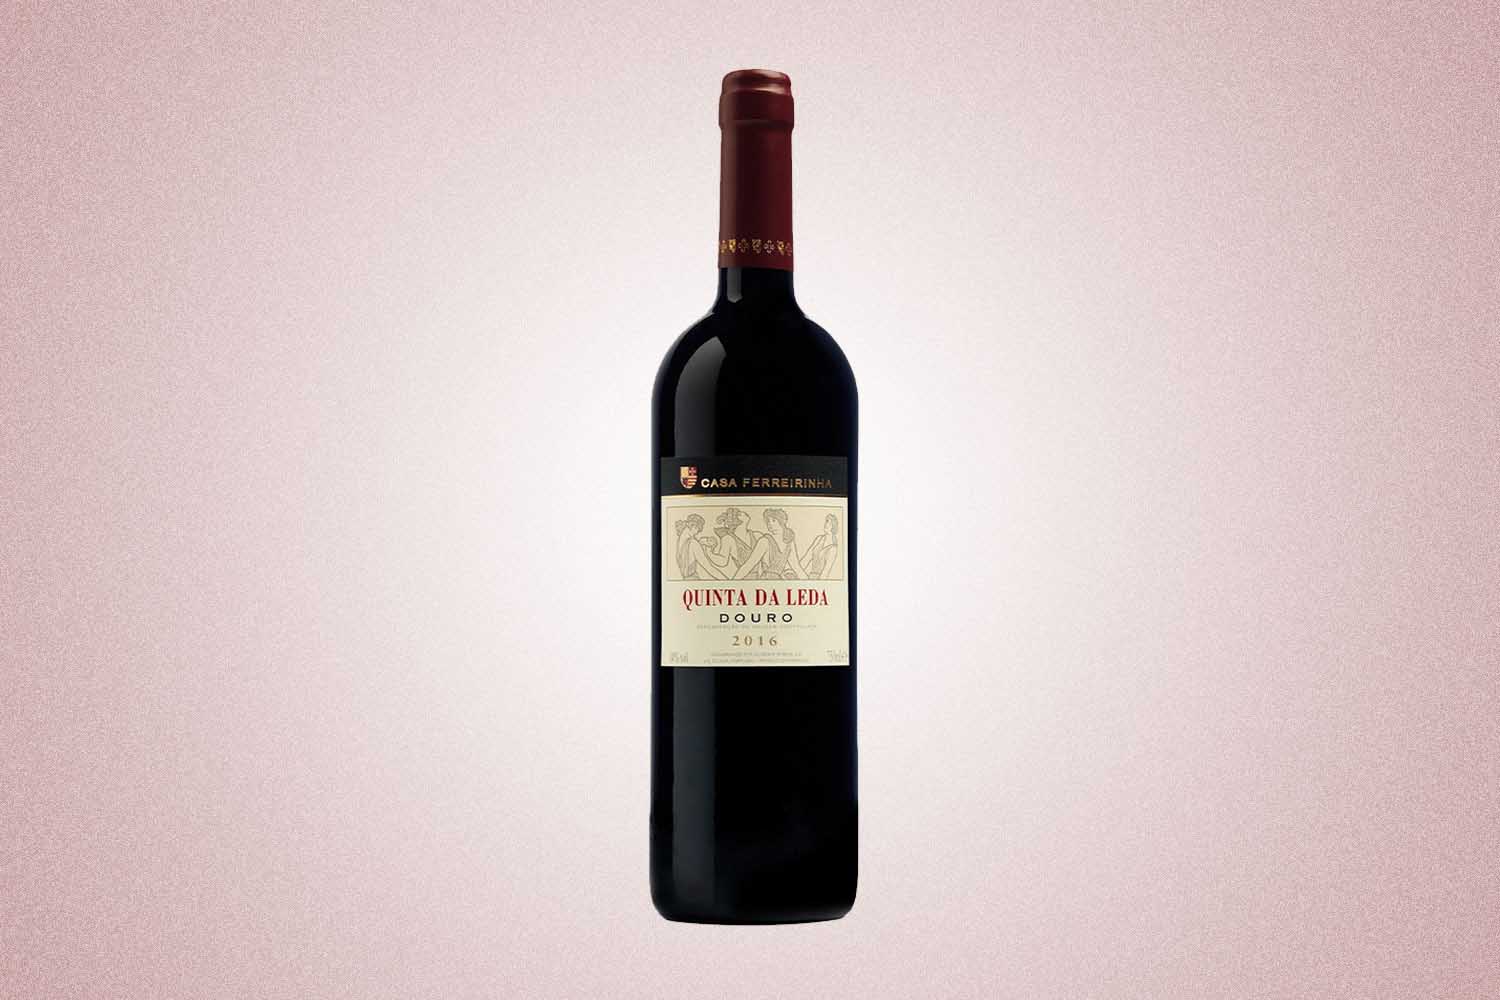 A bottle of red wine from Casa Ferreirinha. The label reads: "Quinta da Leda Douro 2016," a perfect Valentine’s Day gift for 2022, on a pink background.